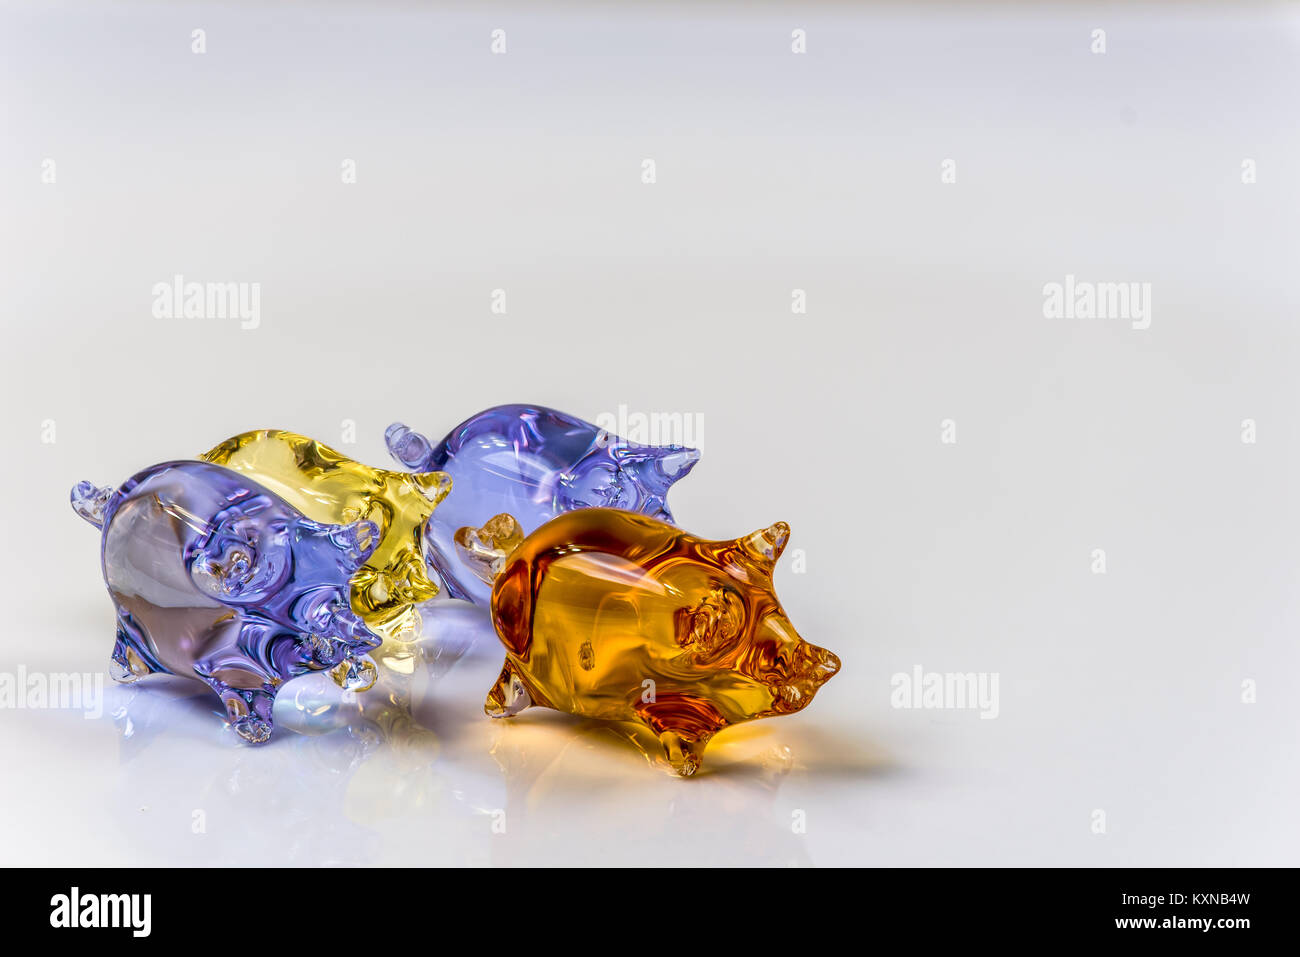 Cute glass pig figurines isolated on light background Stock Photo